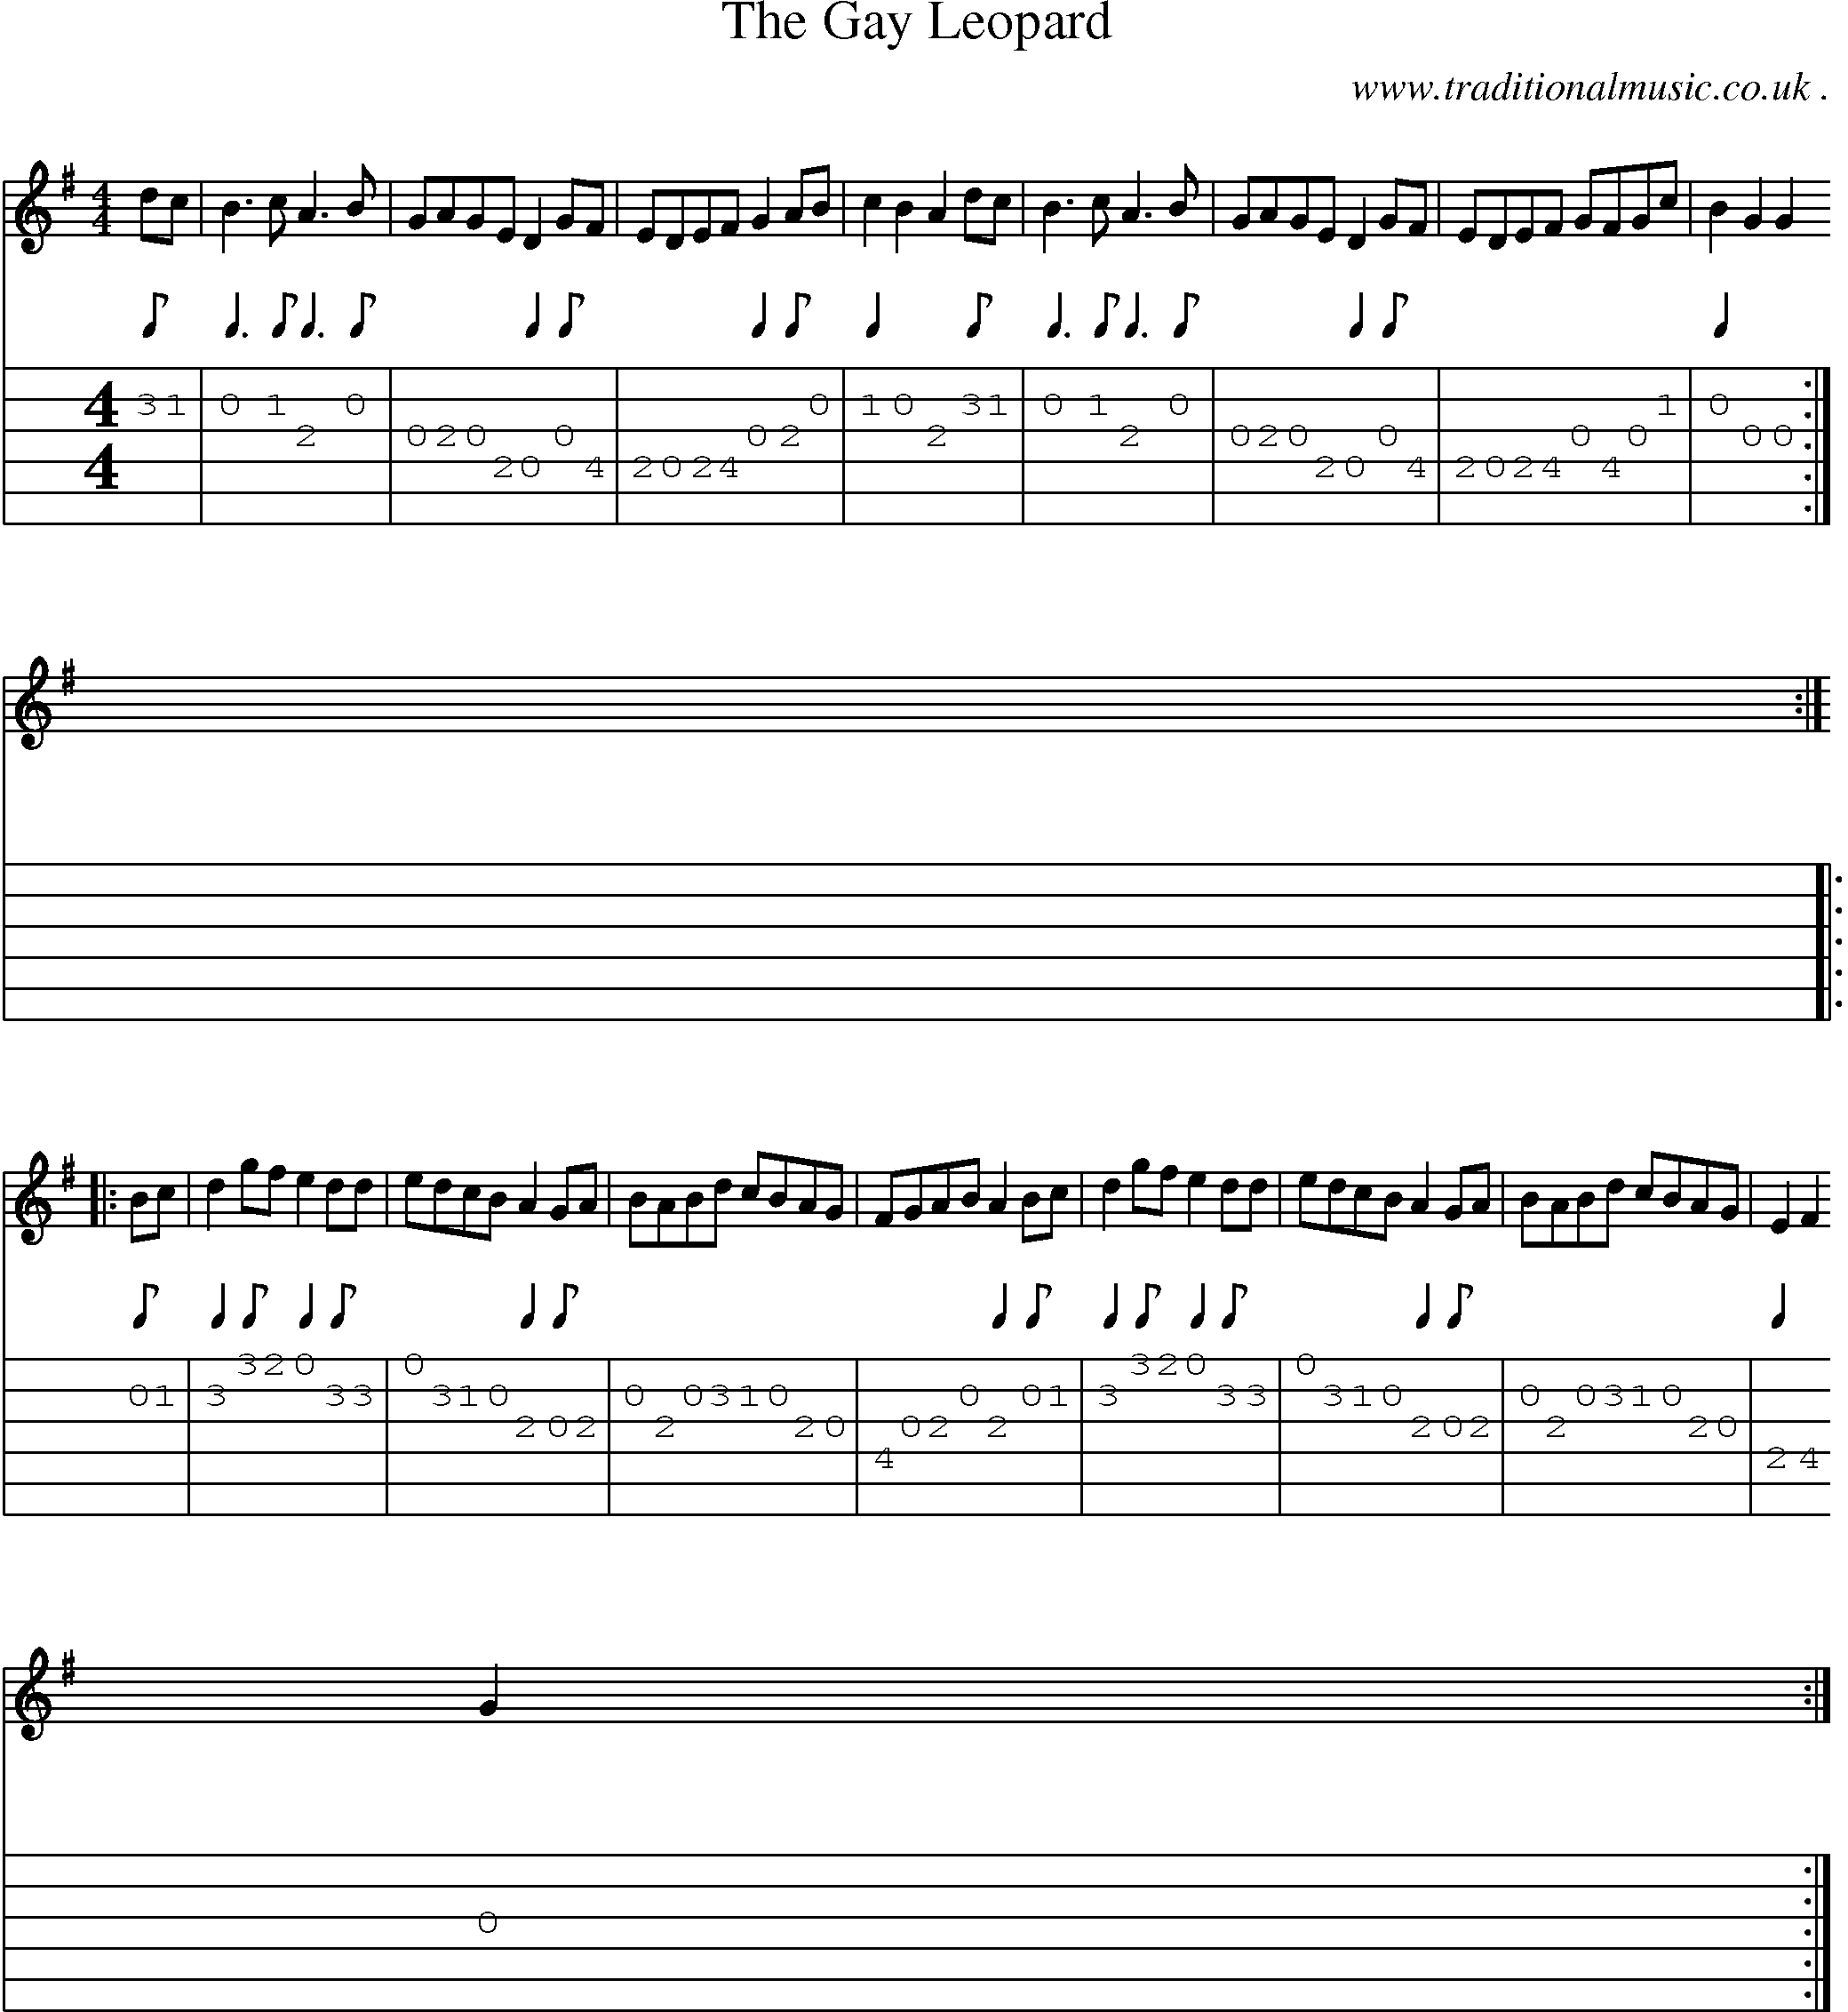 Sheet-Music and Guitar Tabs for The Gay Leopard